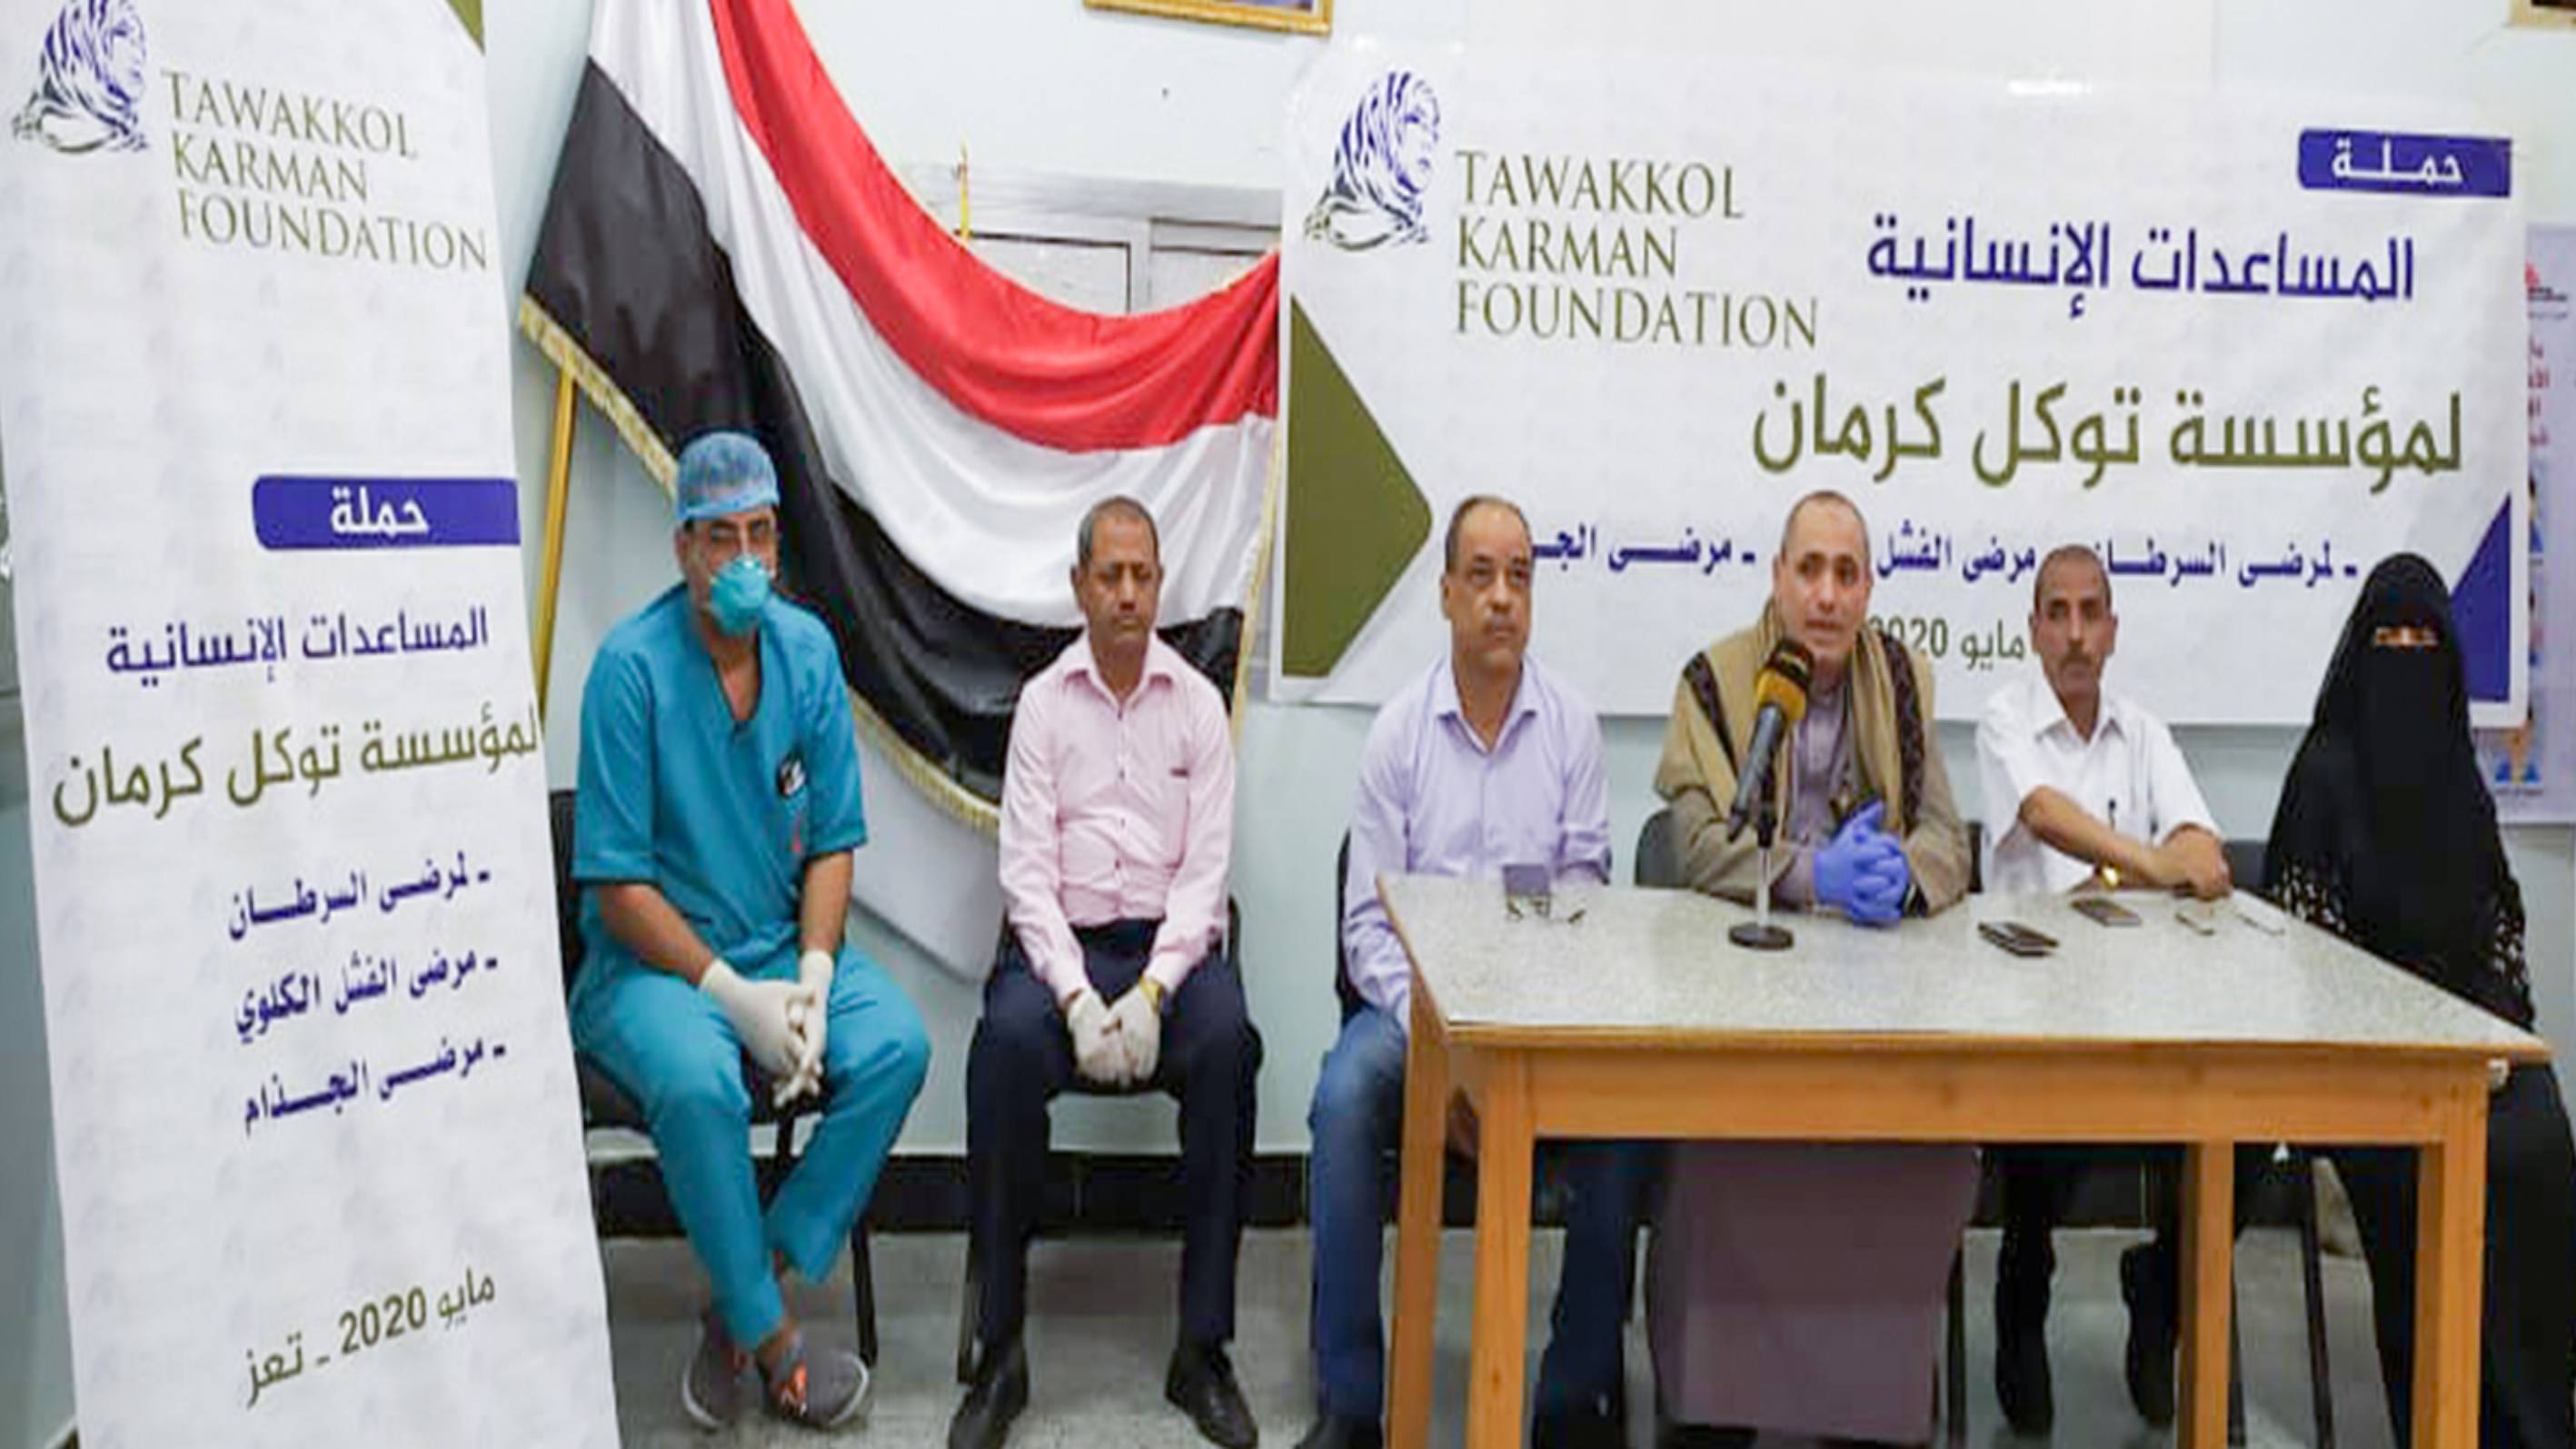 Humanitarian Assistance Campaign in the Context of the Foundation’s Confrontation of Covid-19 Pandemic